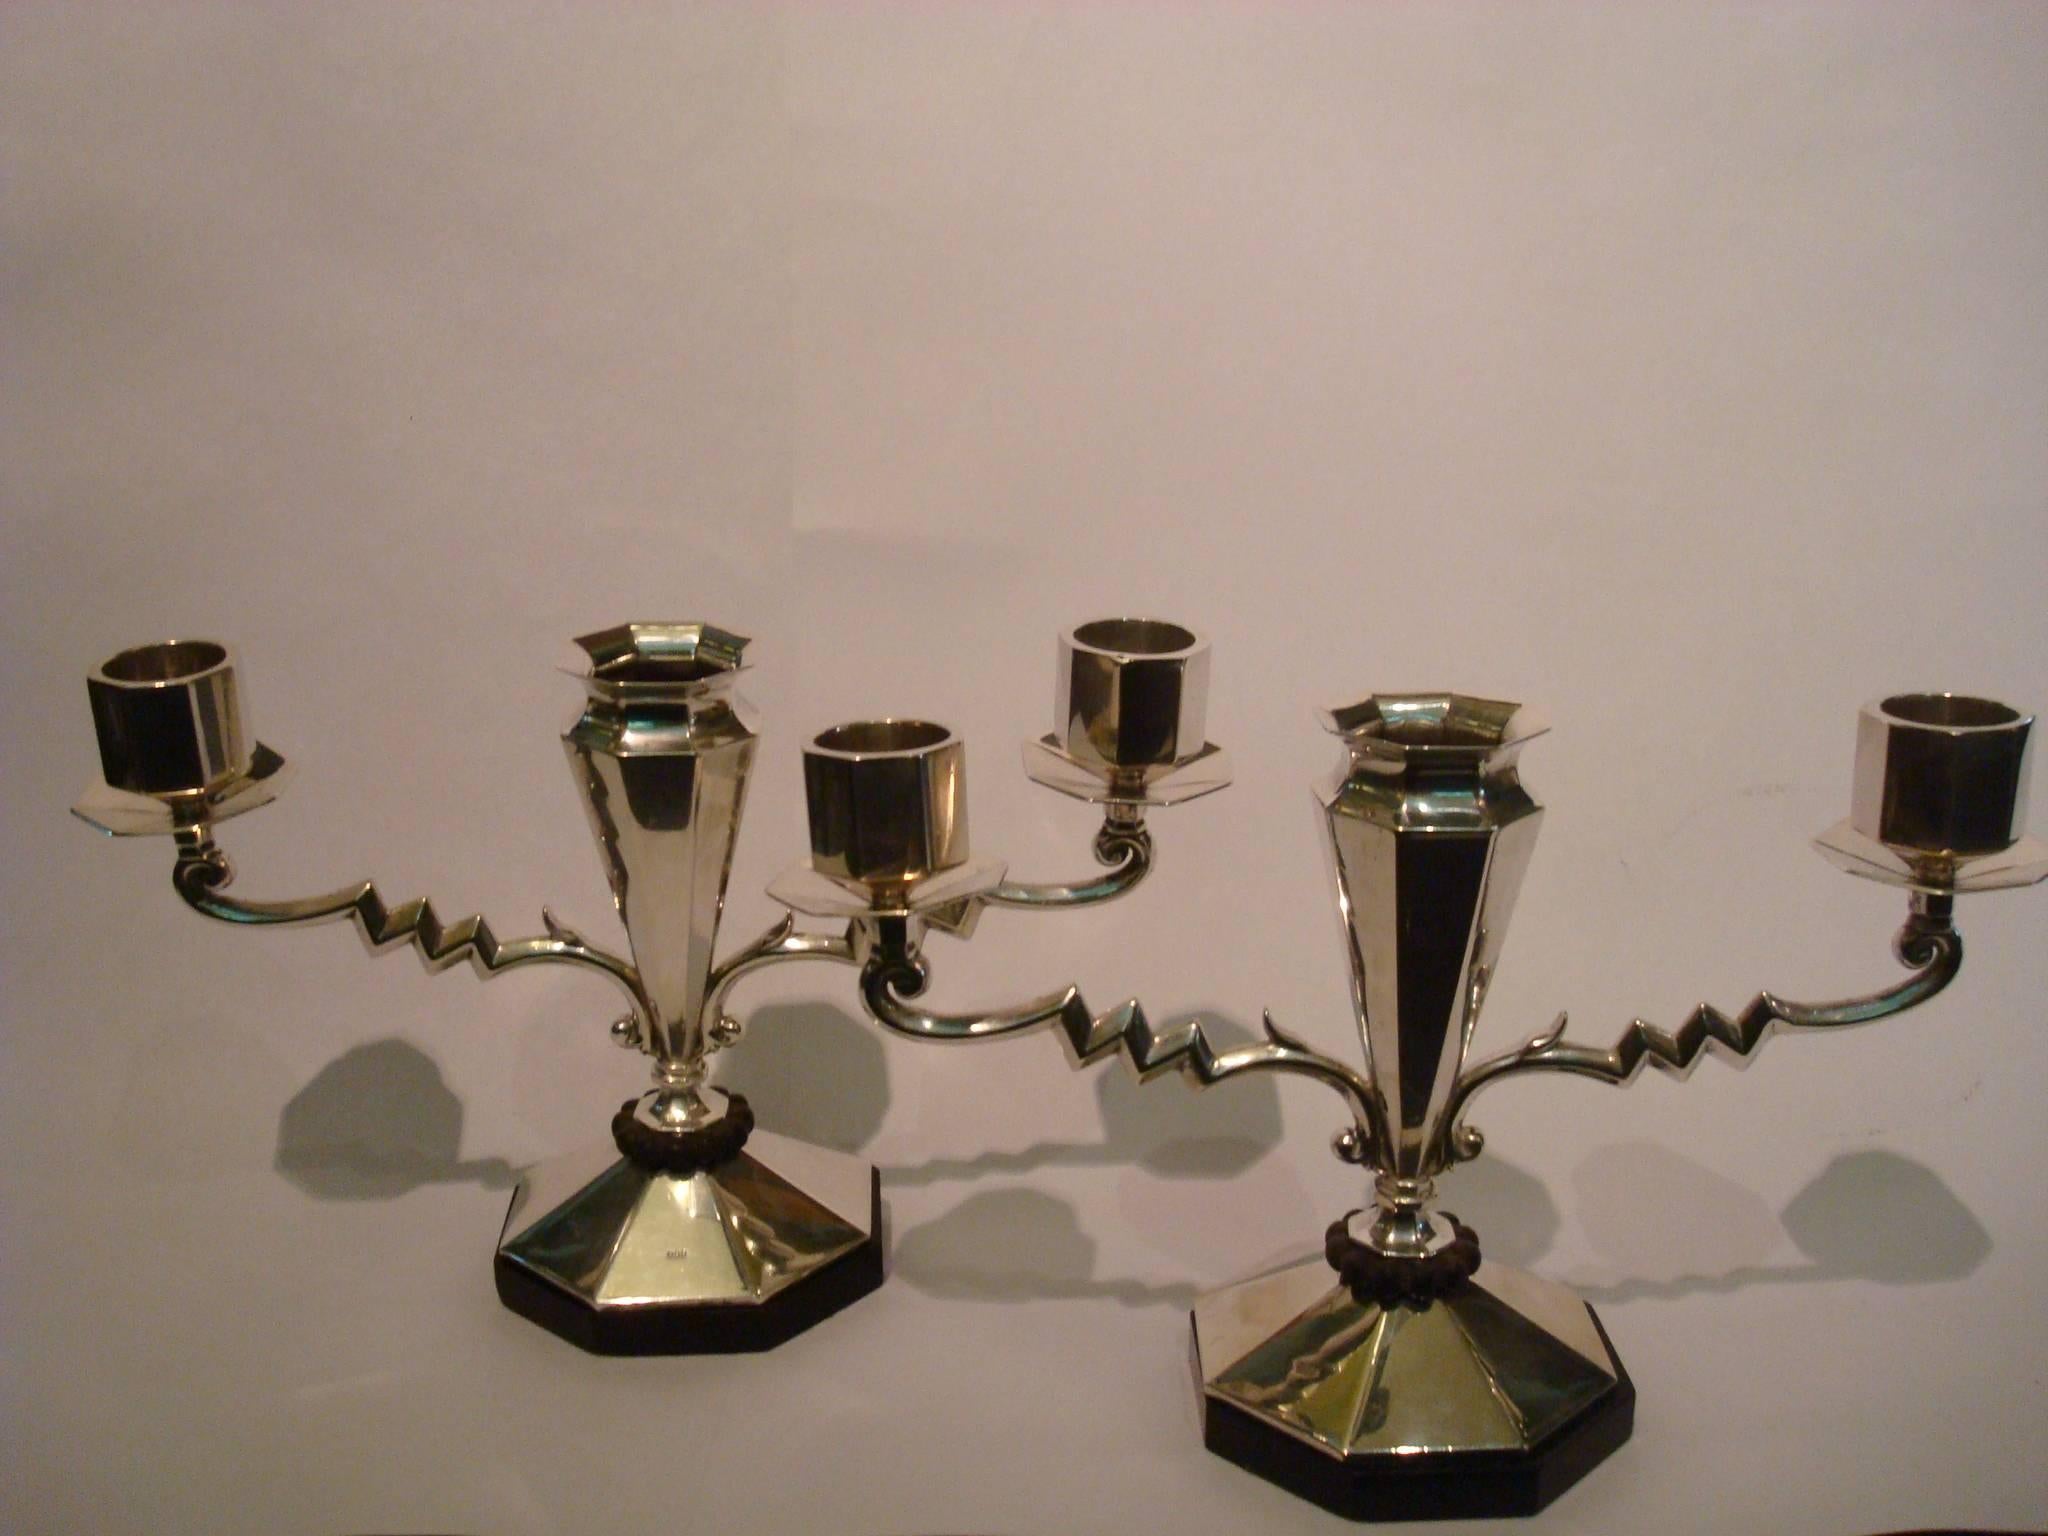 Pair of Art Deco Silver Candleholders with Flower Vase in the Middle For Sale 3